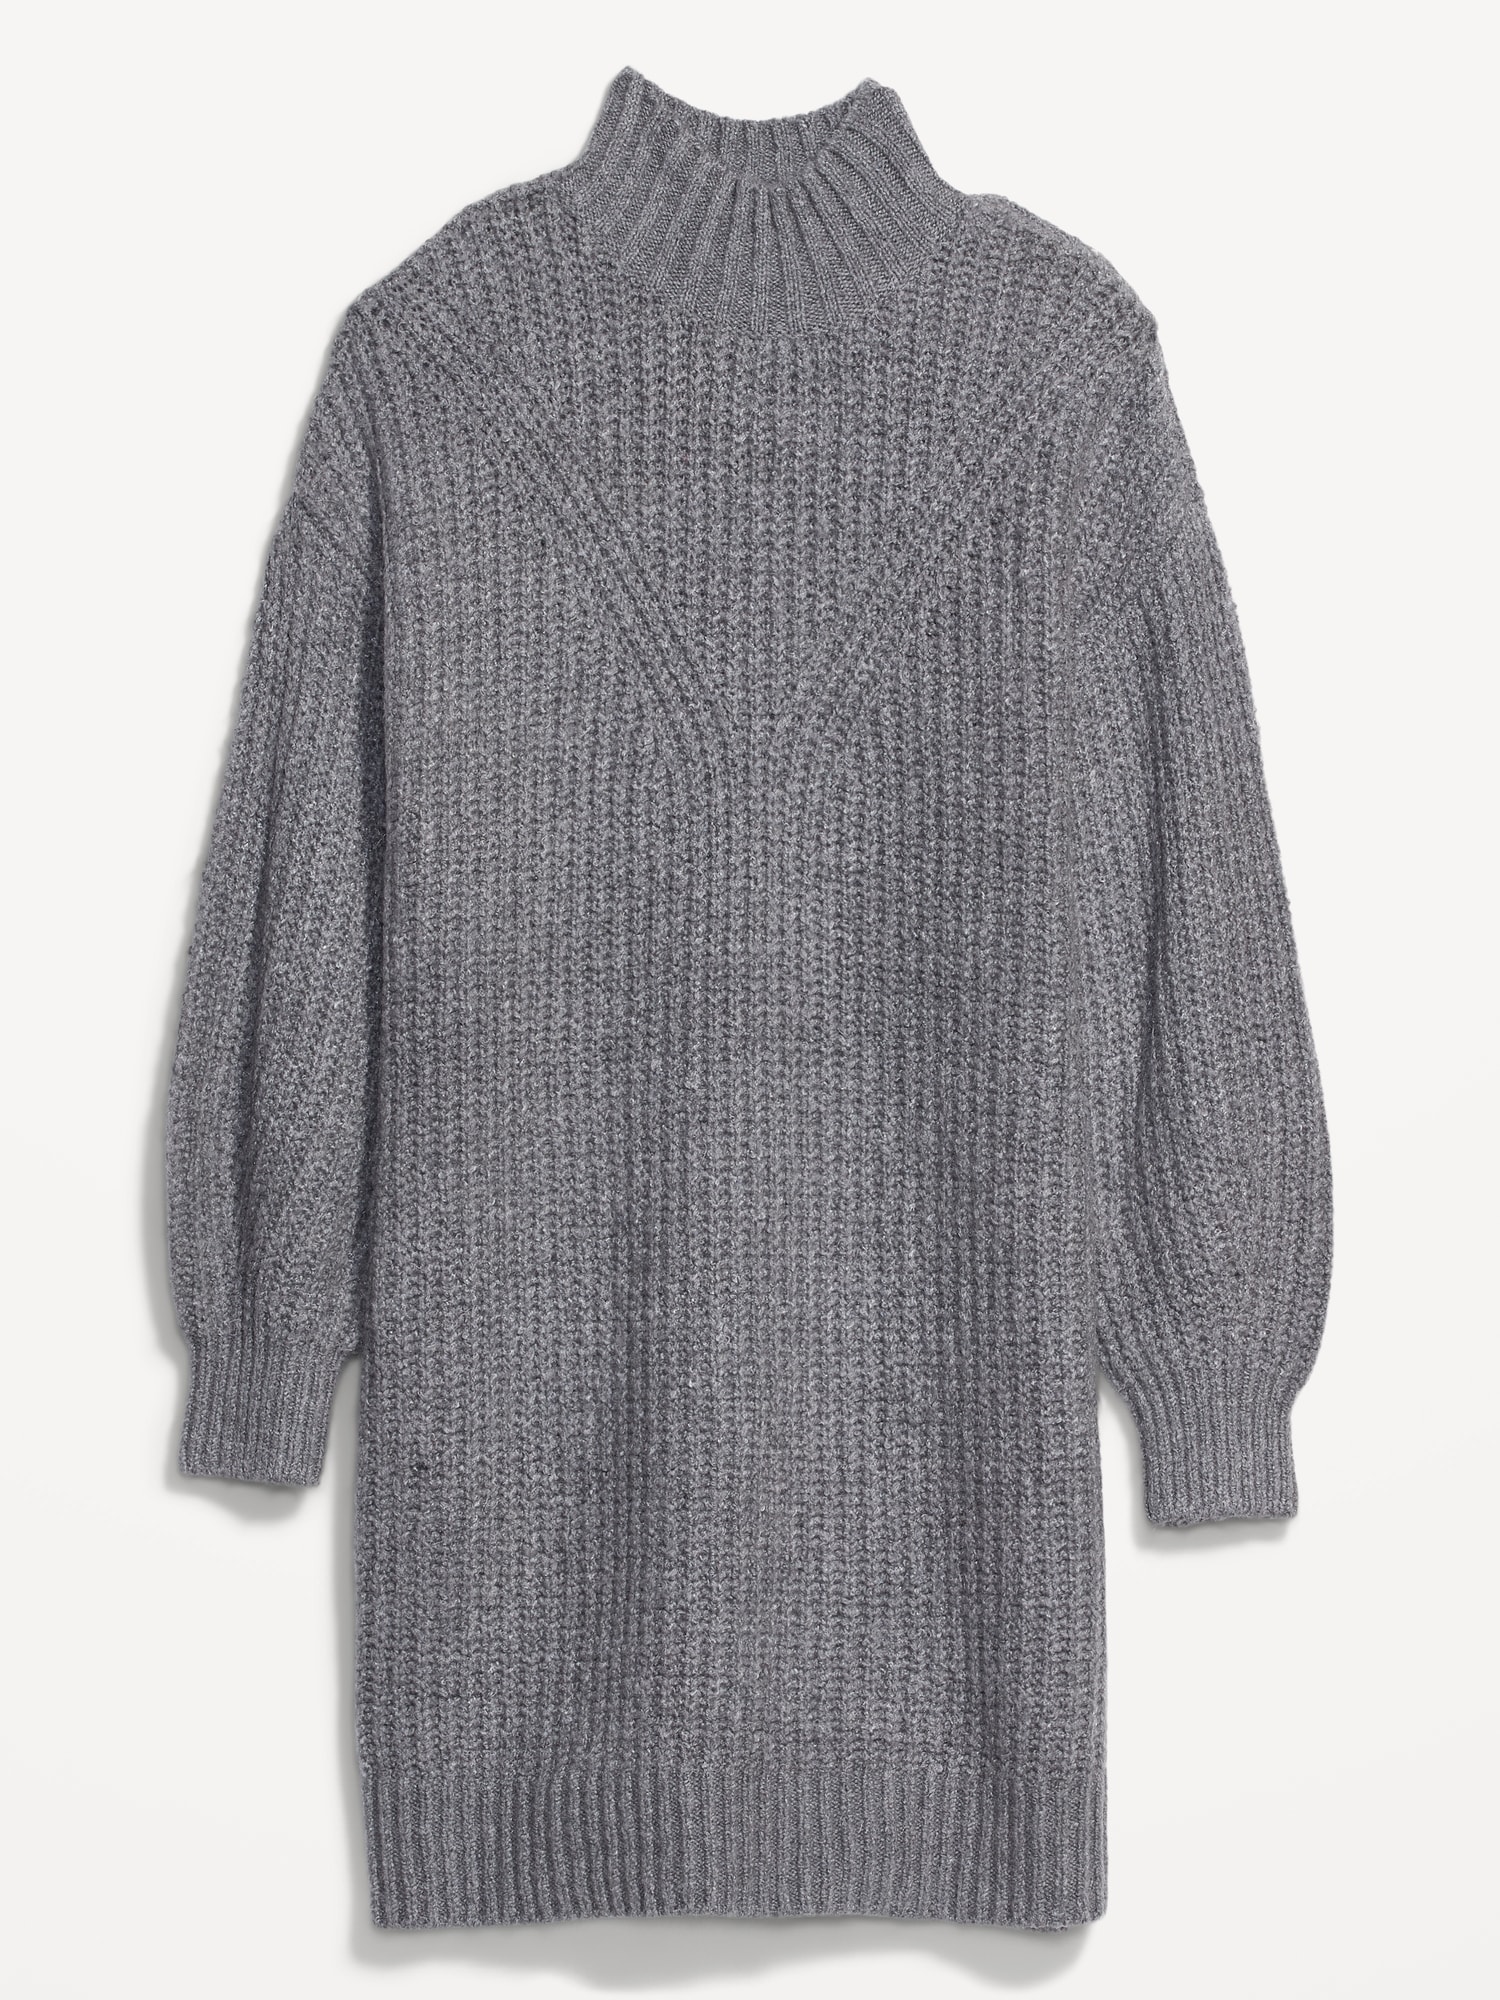 Turtleneck Cable Knit Sleeveless Sweater Dress in Grey - Retro